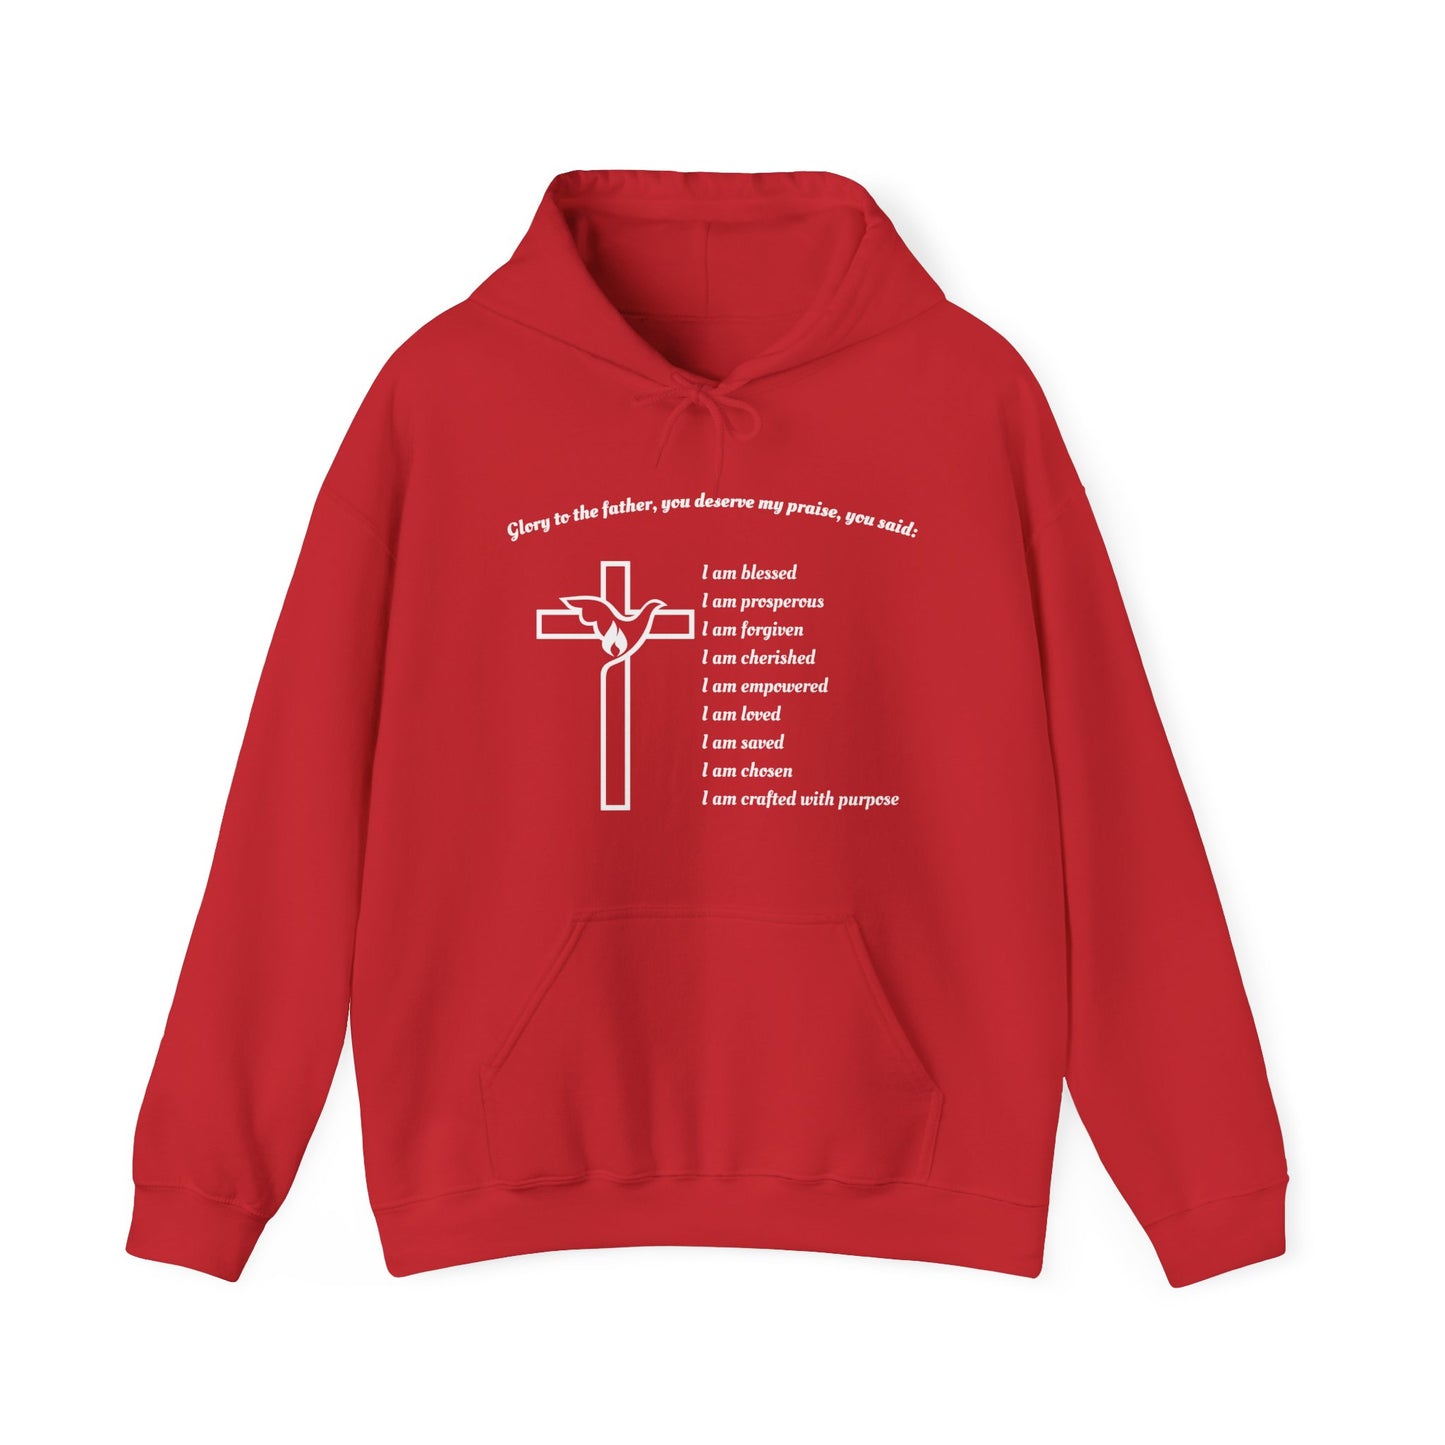 I am Glory to the Father Hooded Sweatshirt Unisex Cozy Heavy Blend53